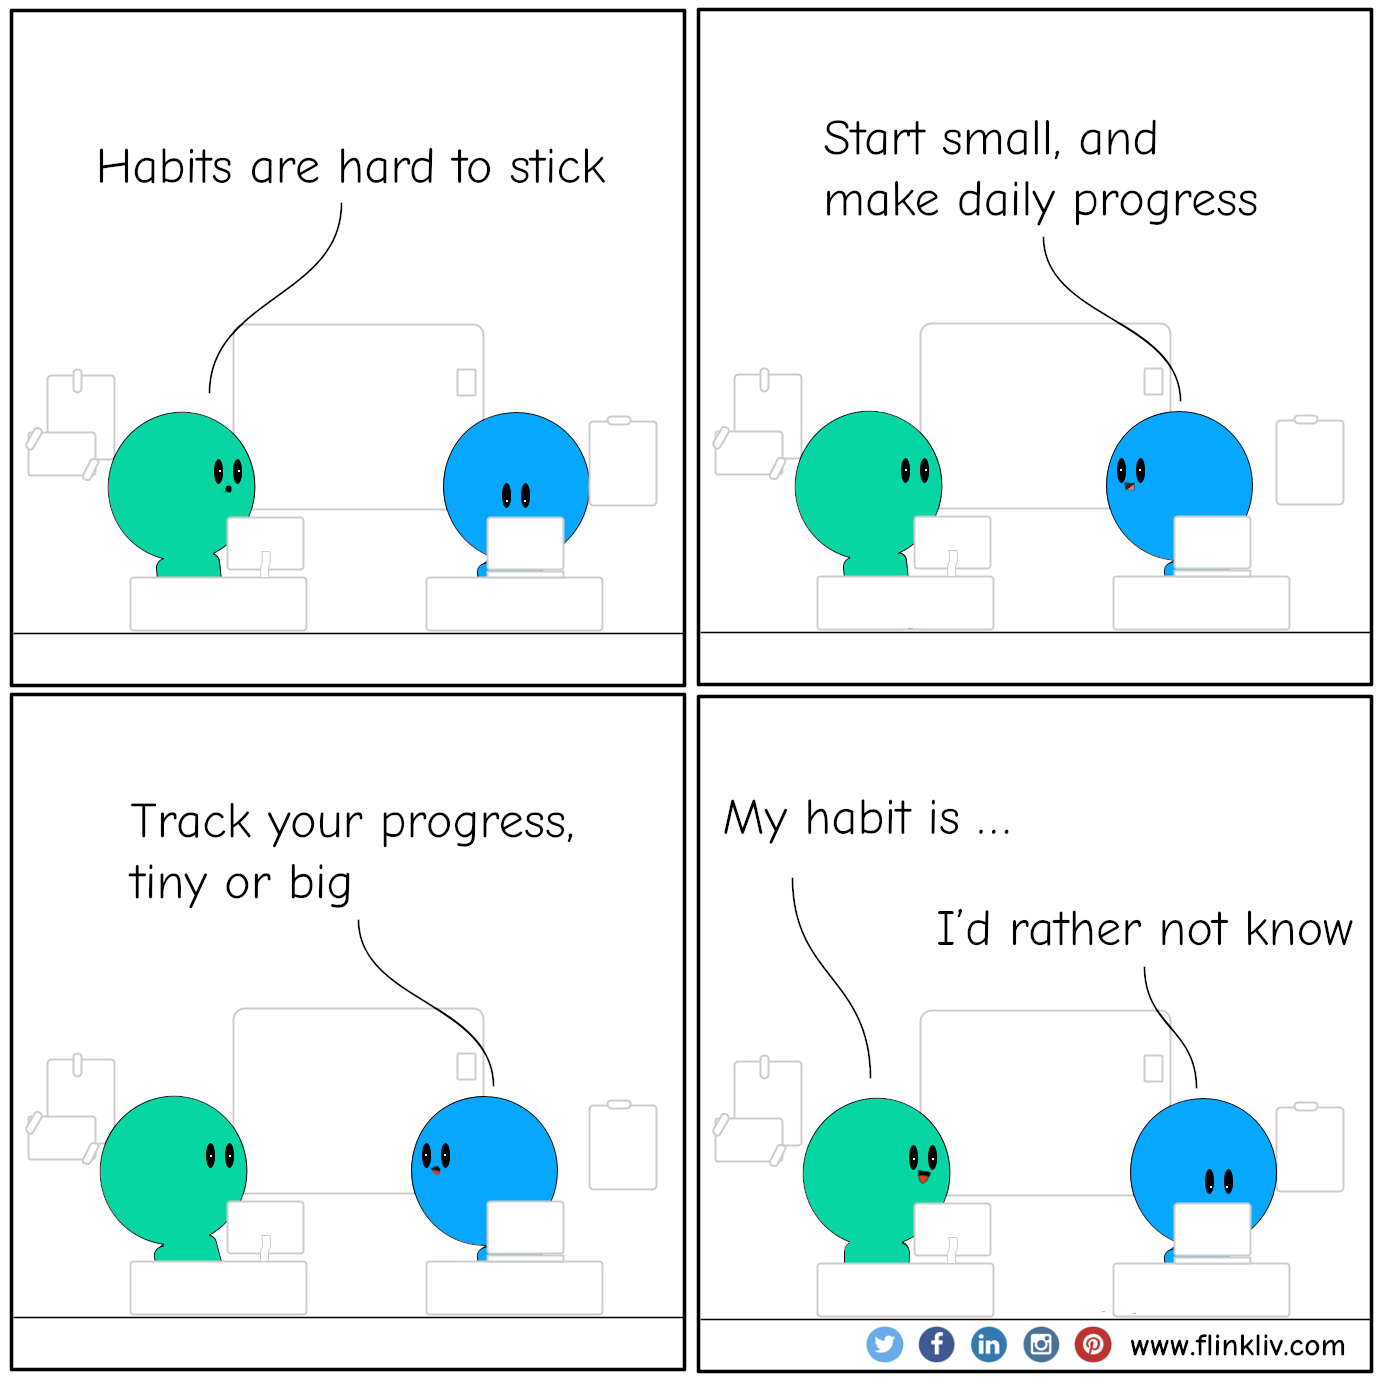 A conversation between A and B about how to make habits stick A: Habits are hard to stick. B: Start small, and make daily progress. B: Track your progress, tiny or big. A: My habit is ... B: I’d rather not know.